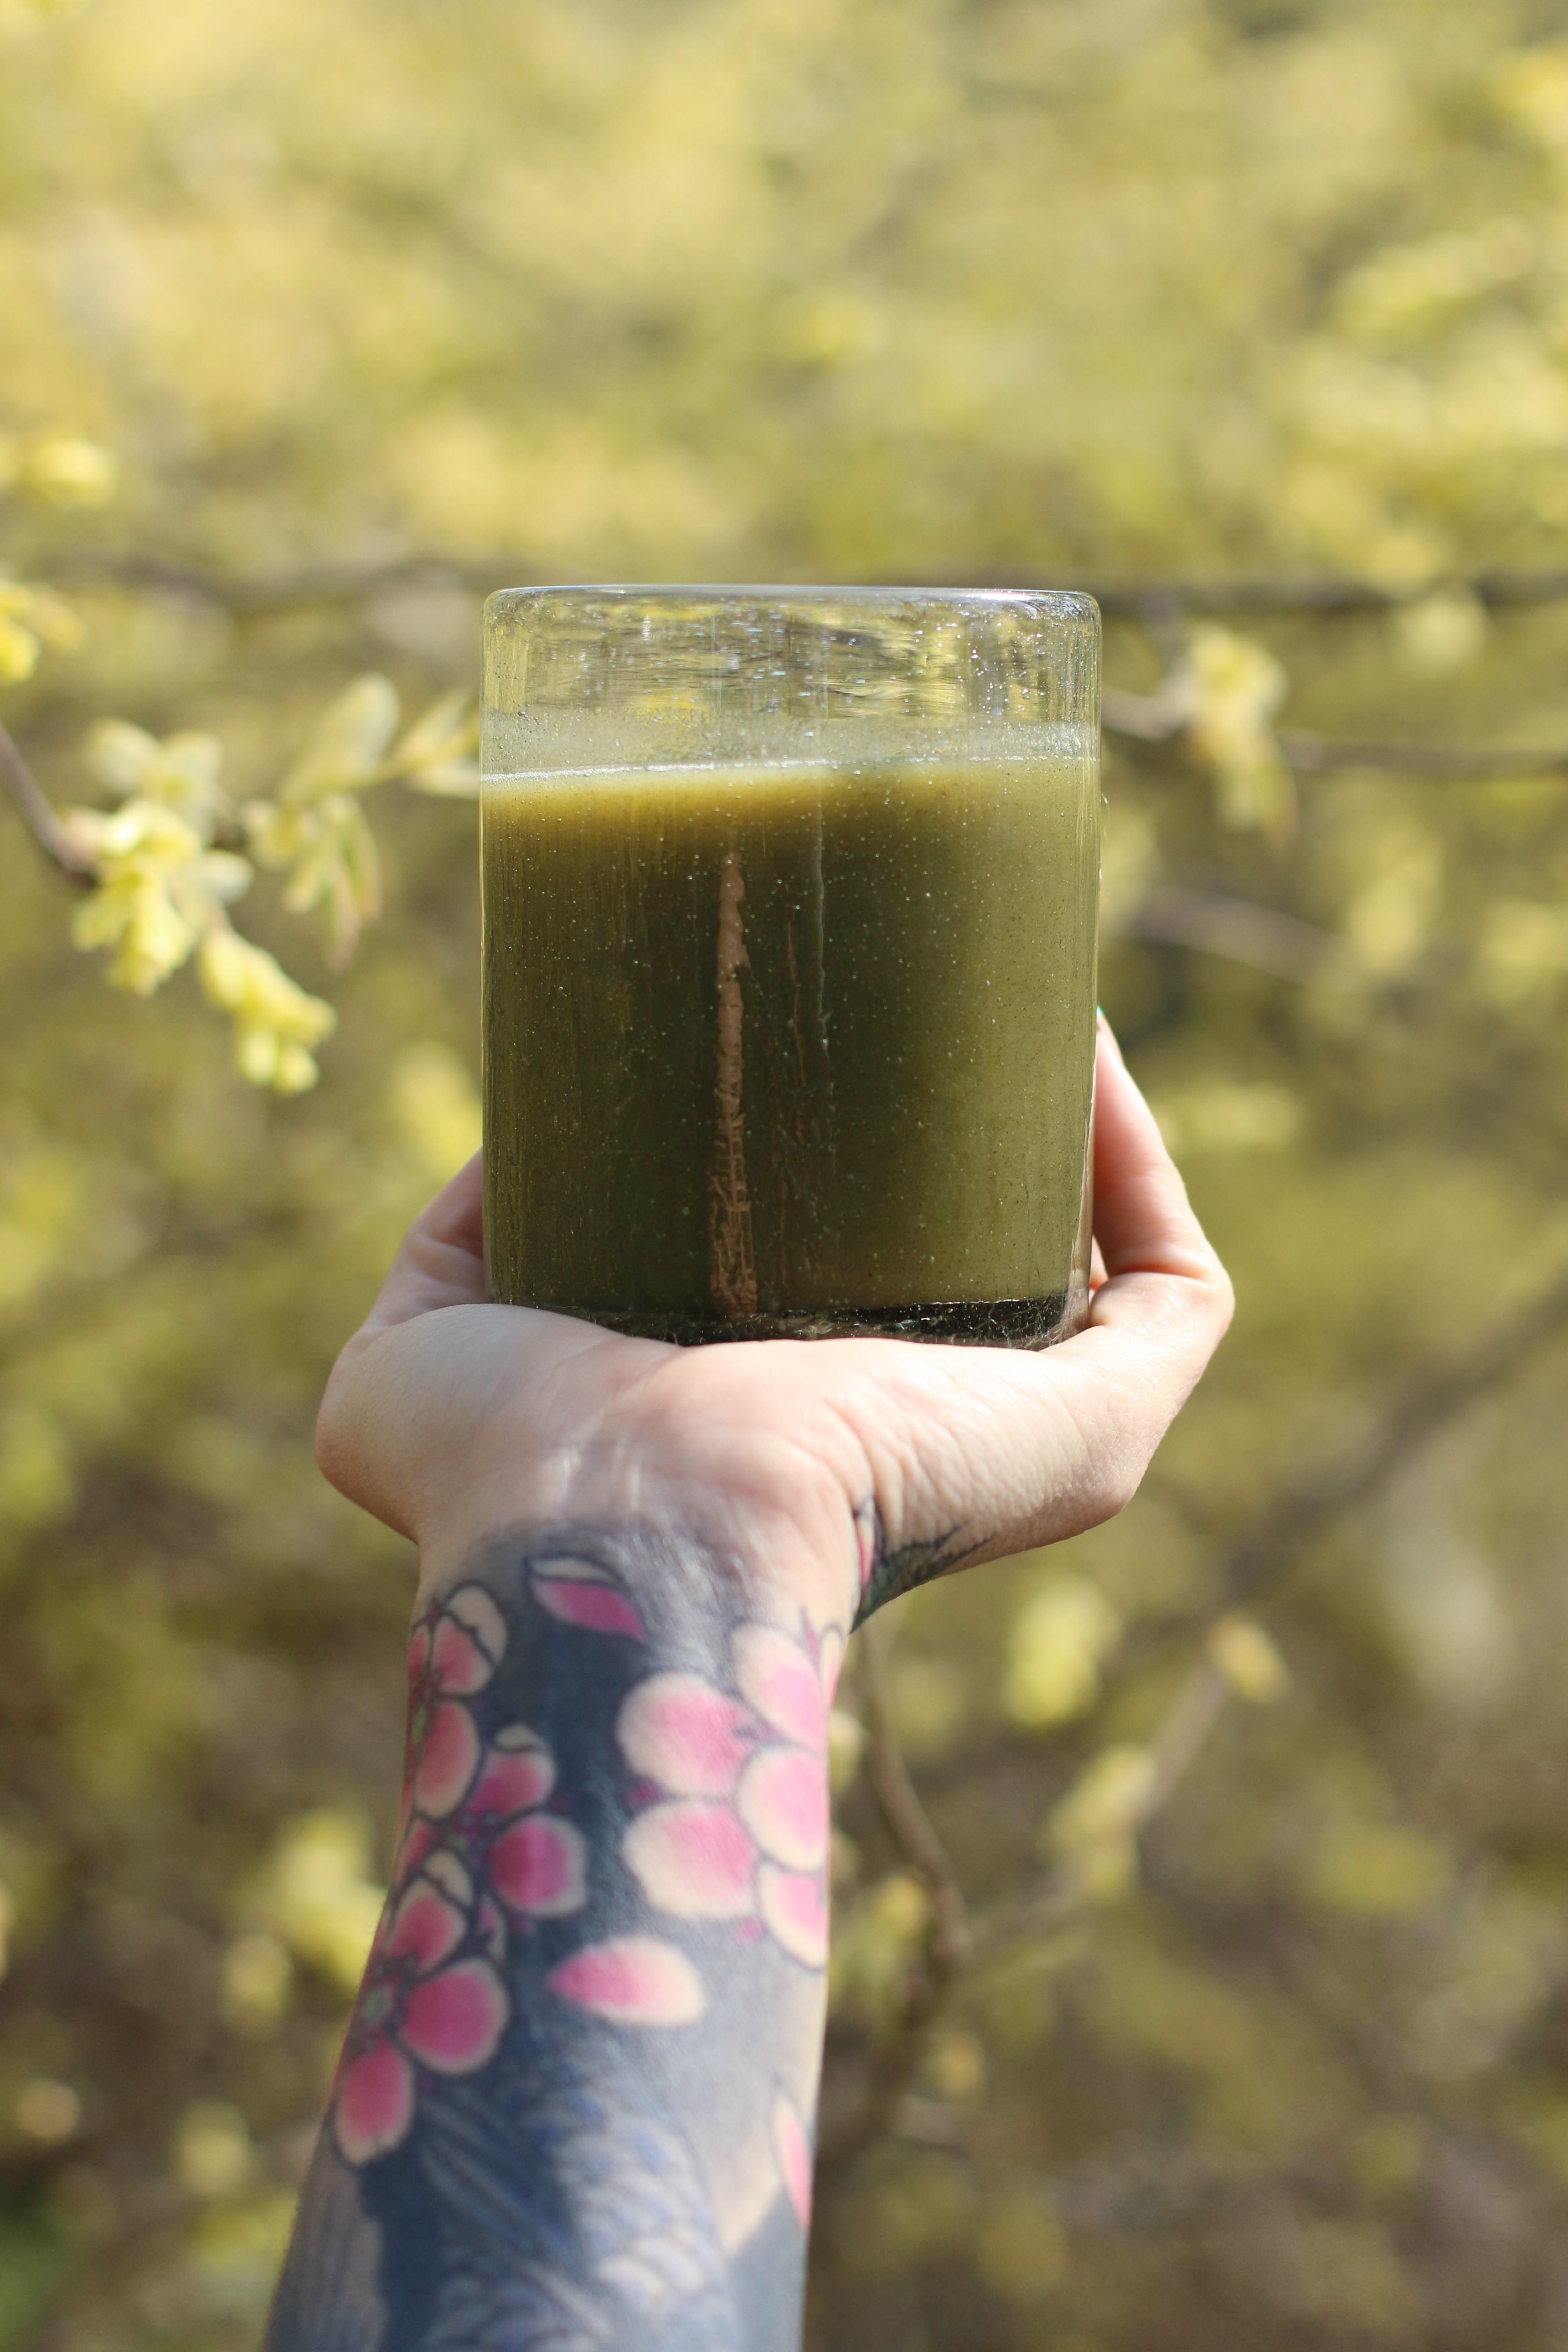 tattooed-arm-extended-palm-up-holding-glass-of-green-juice-with-trees-in-background